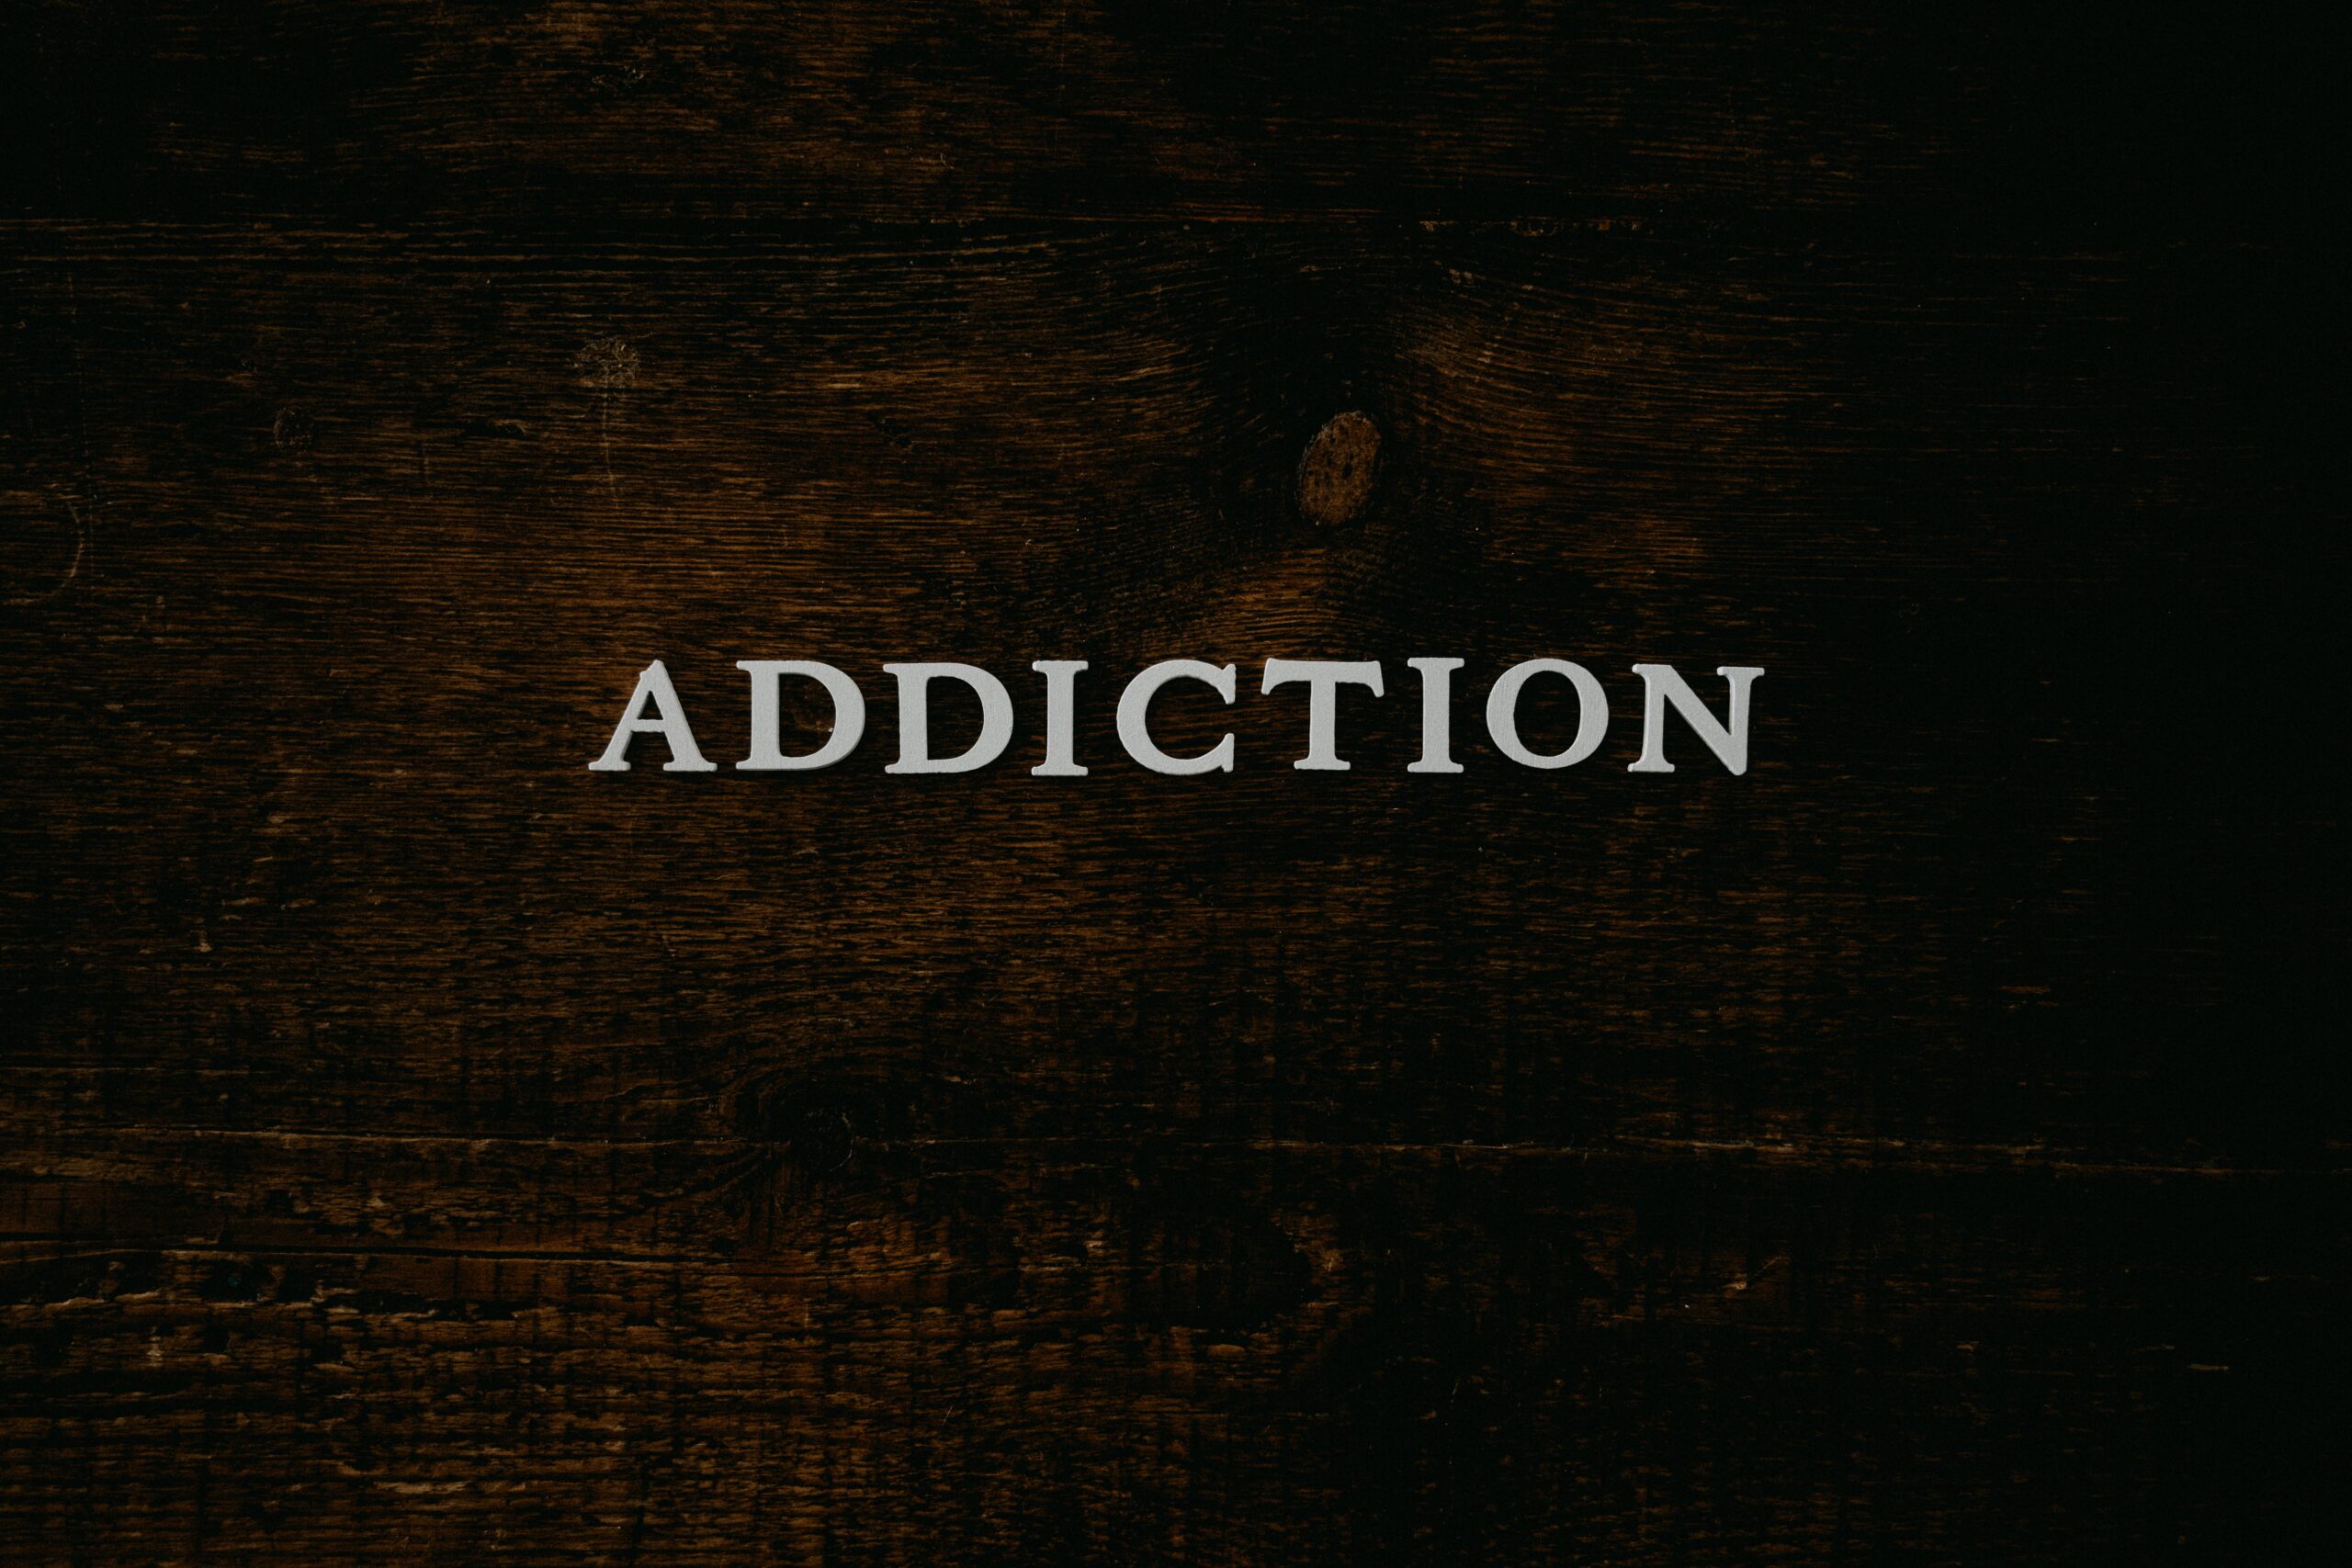 addiction spelled out in white letters on wooden background